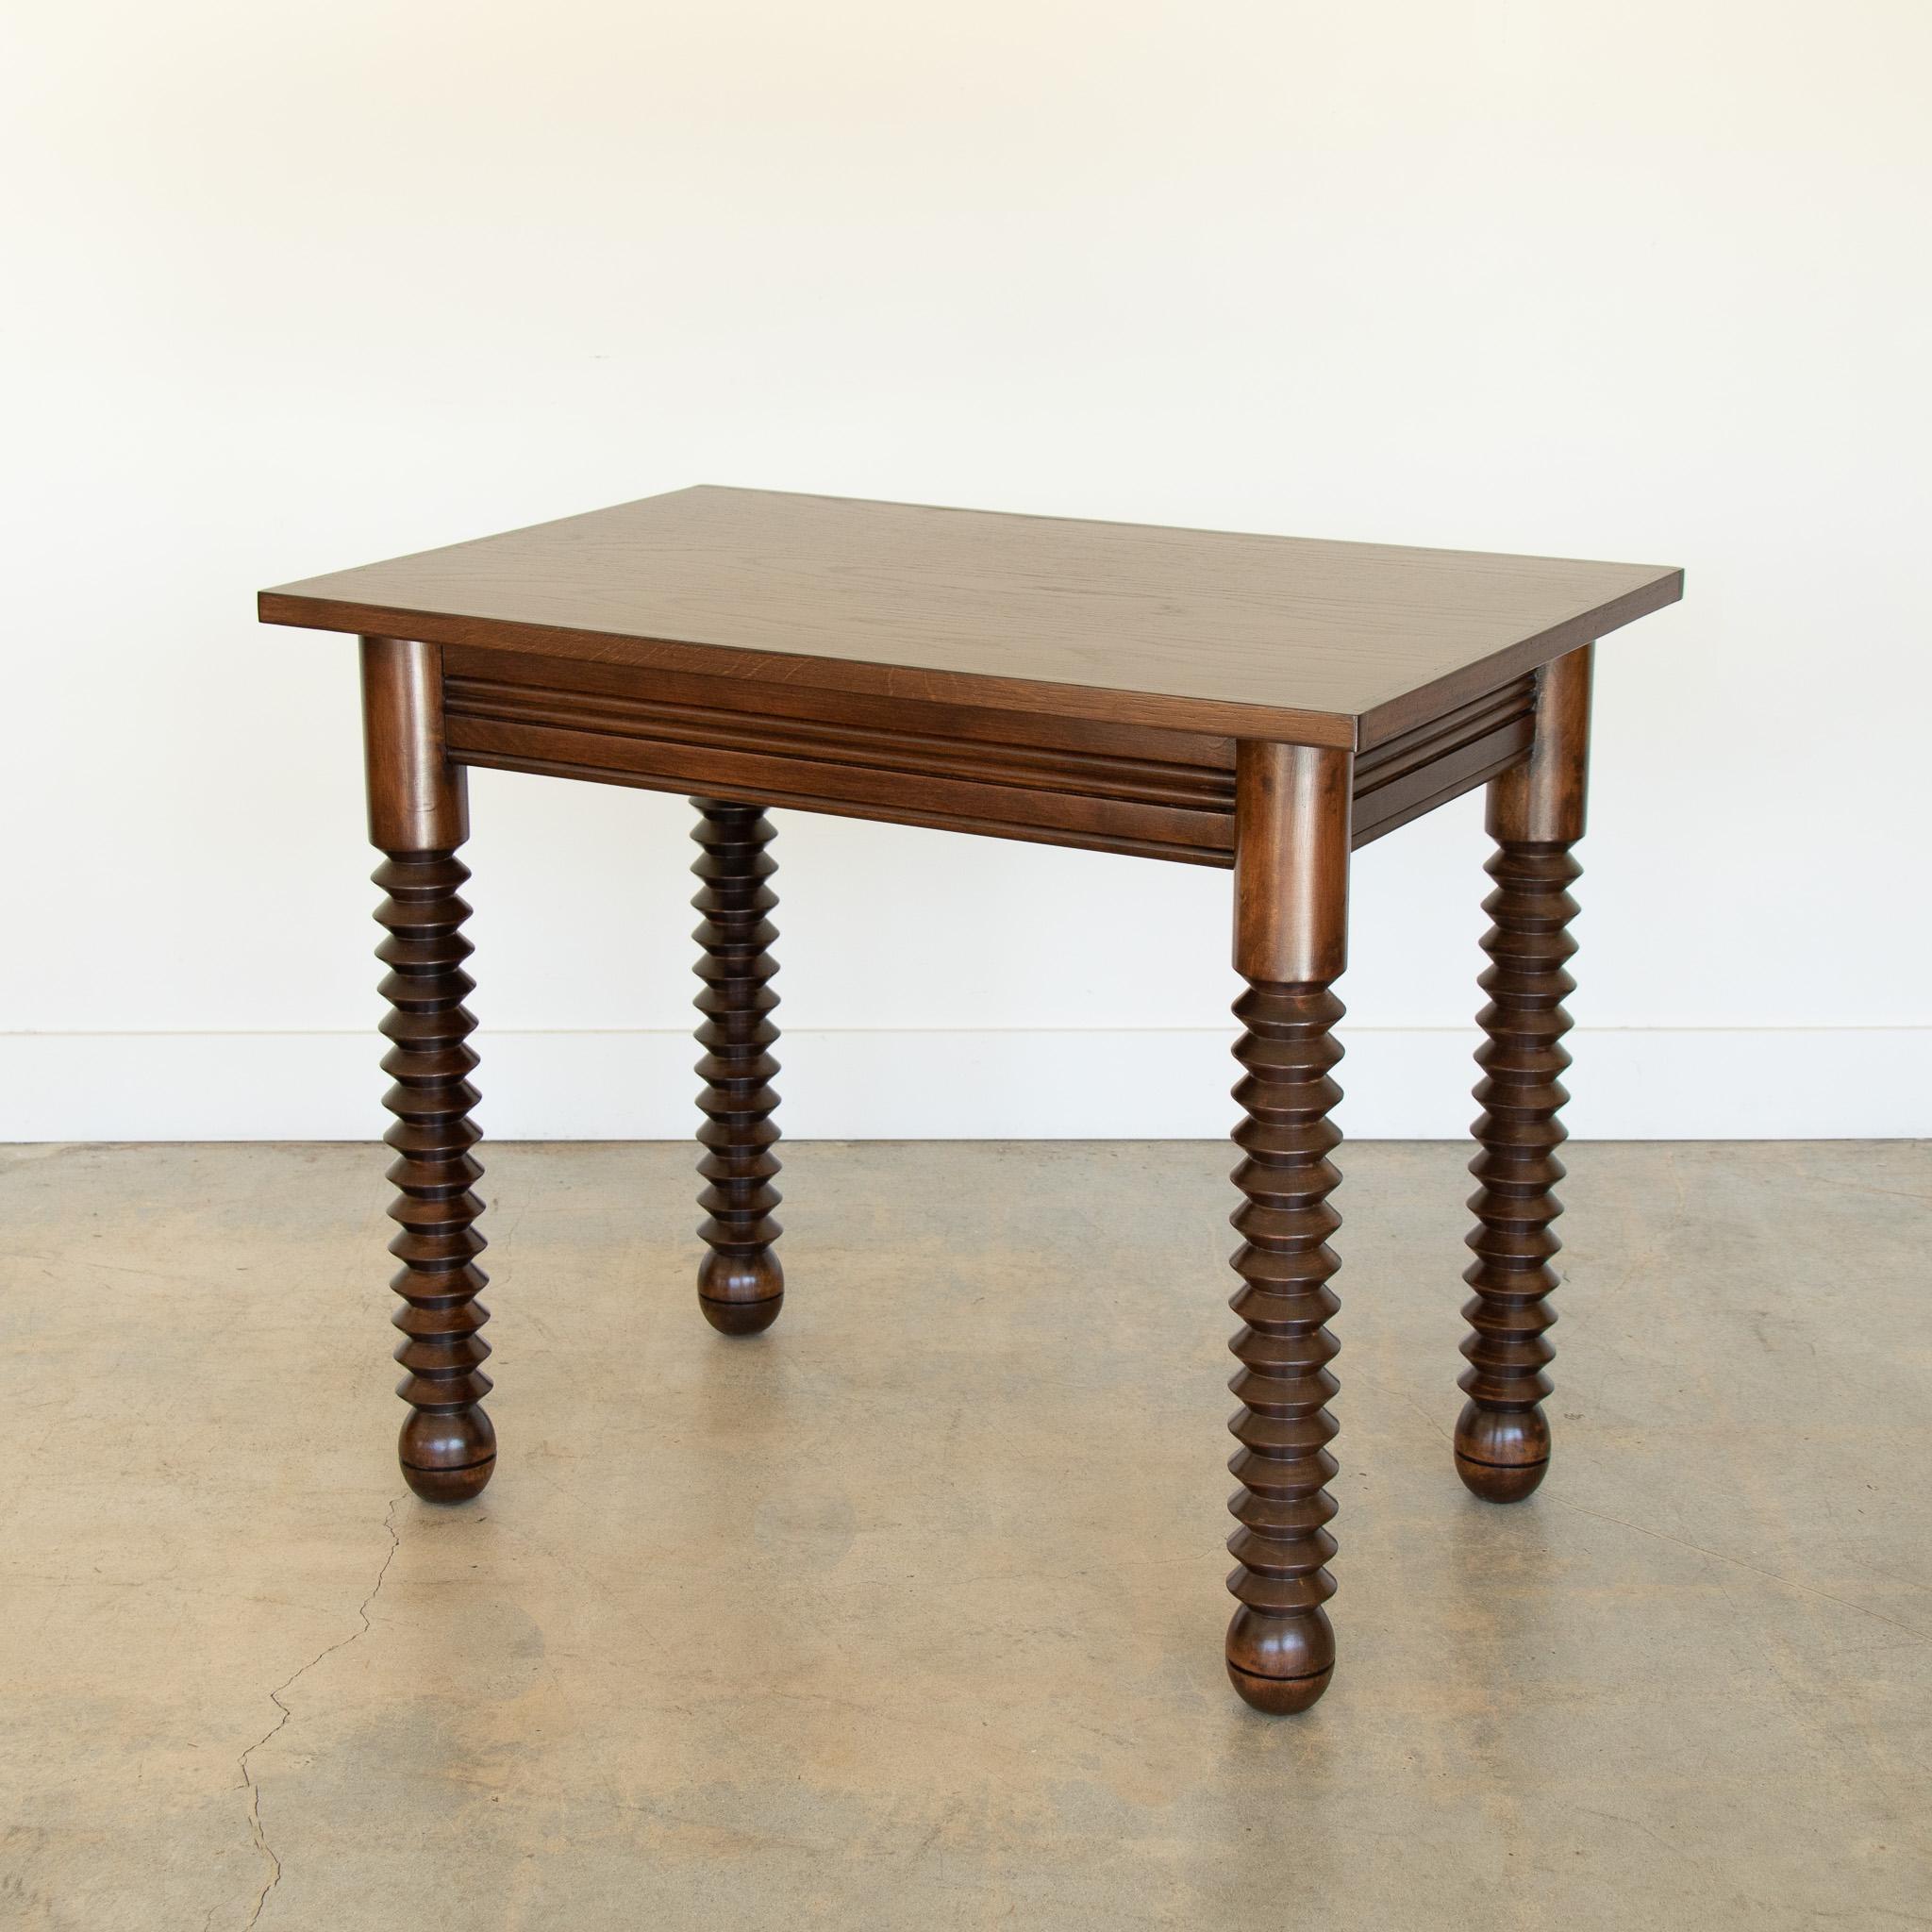 Great wood table by Charles Dudouyt, made in France, 1940's.  Rectangular top with four thick carved wood legs and ball feet. Newly refinished in medium stain showing nice grain in wood. Perfect as a small desk or console table. Multiple available. 